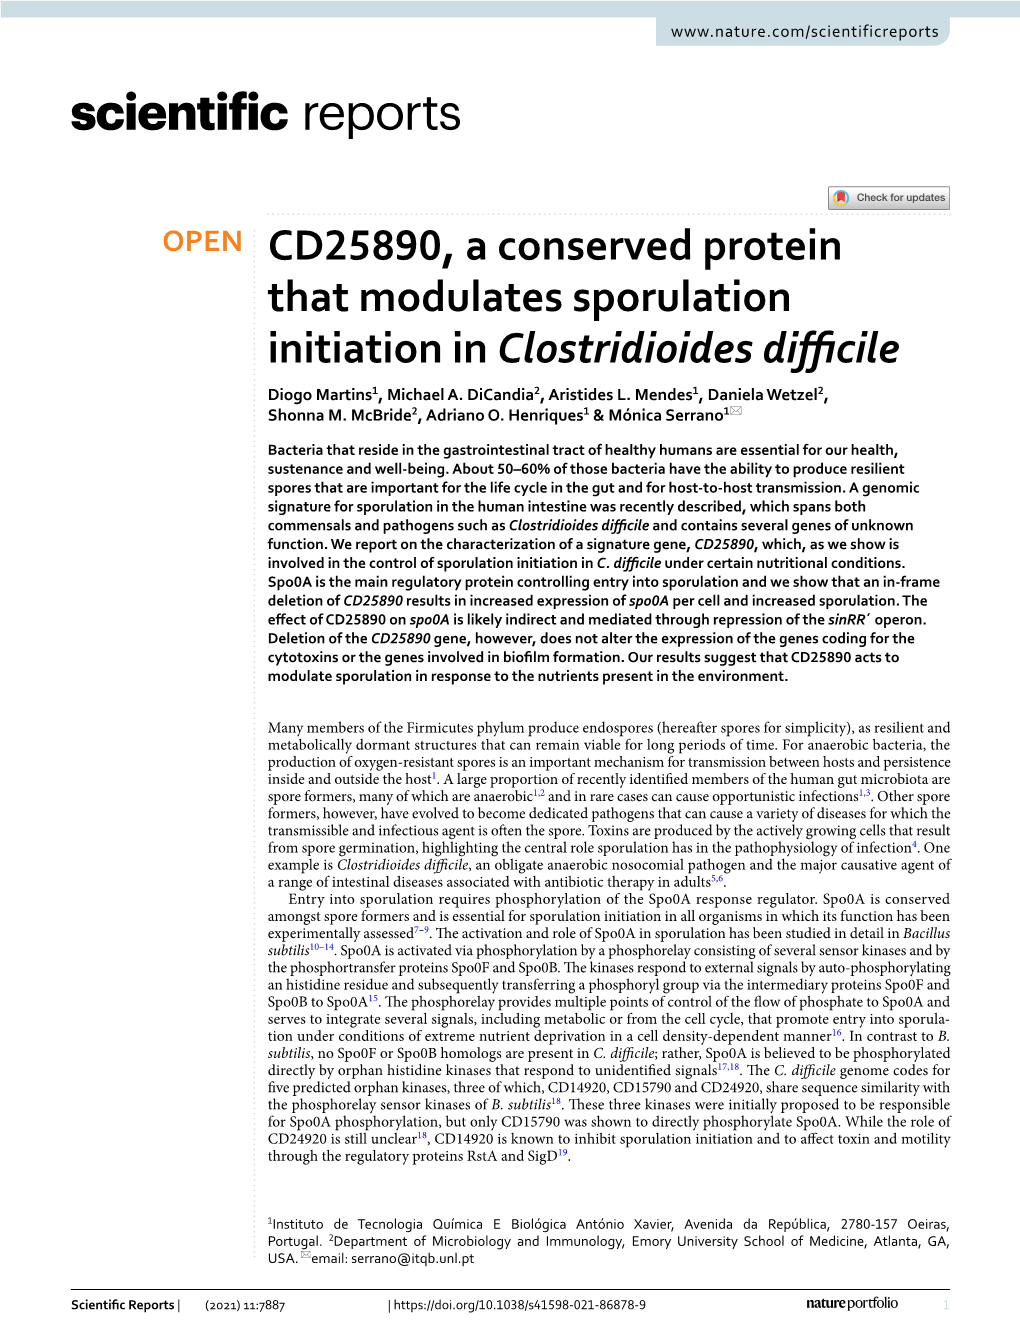 CD25890, a Conserved Protein That Modulates Sporulation Initiation in Clostridioides Difcile Diogo Martins1, Michael A